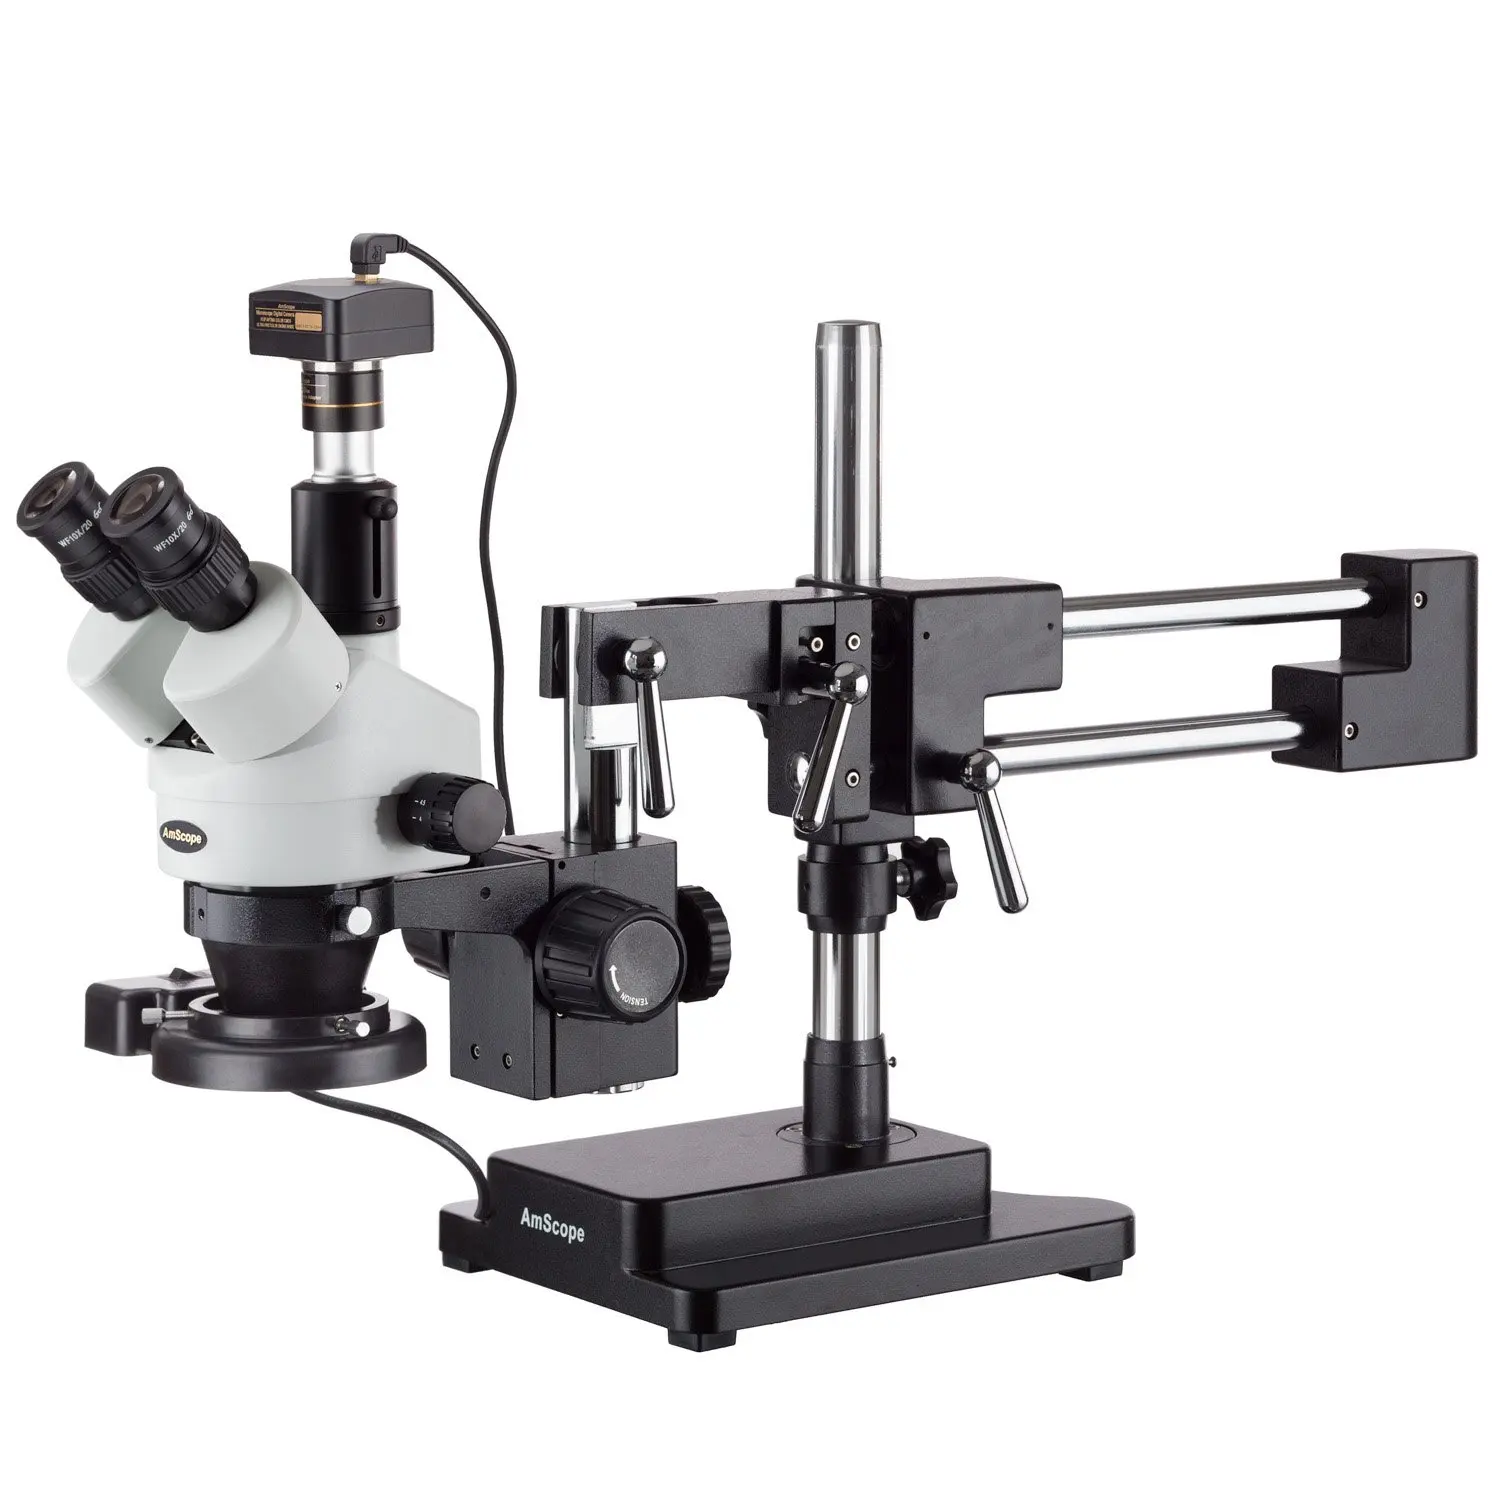 0.7X-4.5X Zoom Objective 110V-240V WH10x and WH20x Eyepieces Includes 0.5x and 2.0x Barlow Lens 3.5X-180X Magnification AmScope SM-8TZZ-FOR-10M Digital Professional Trinocular Stereo Zoom Microscope Fiber-Optic Ring Light Articulating-Arm Boom Stand